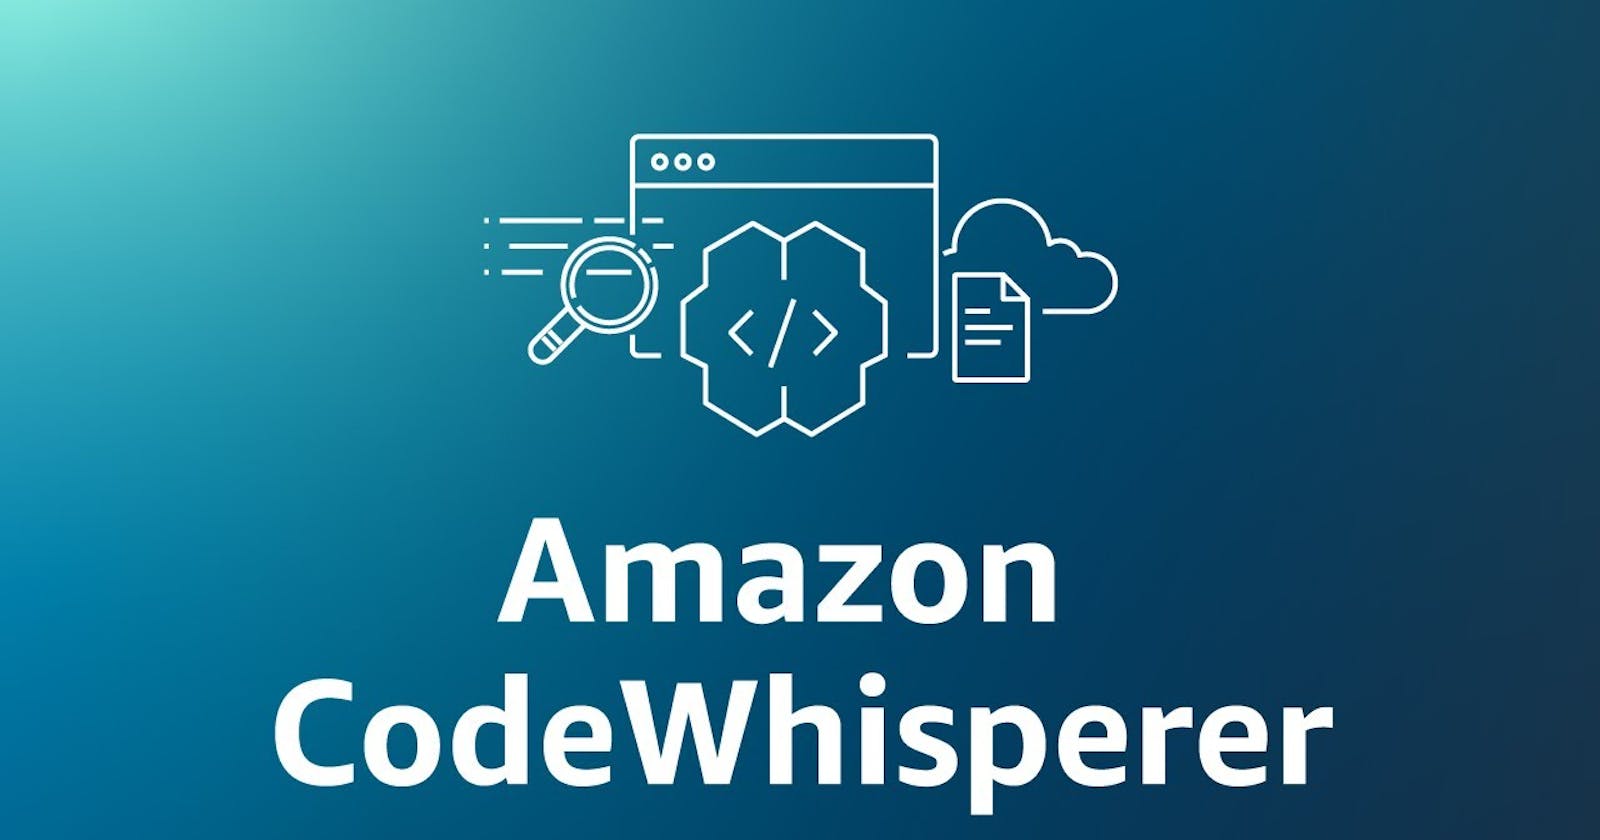 About Amazon CodeWhisperer, which makes coding easier